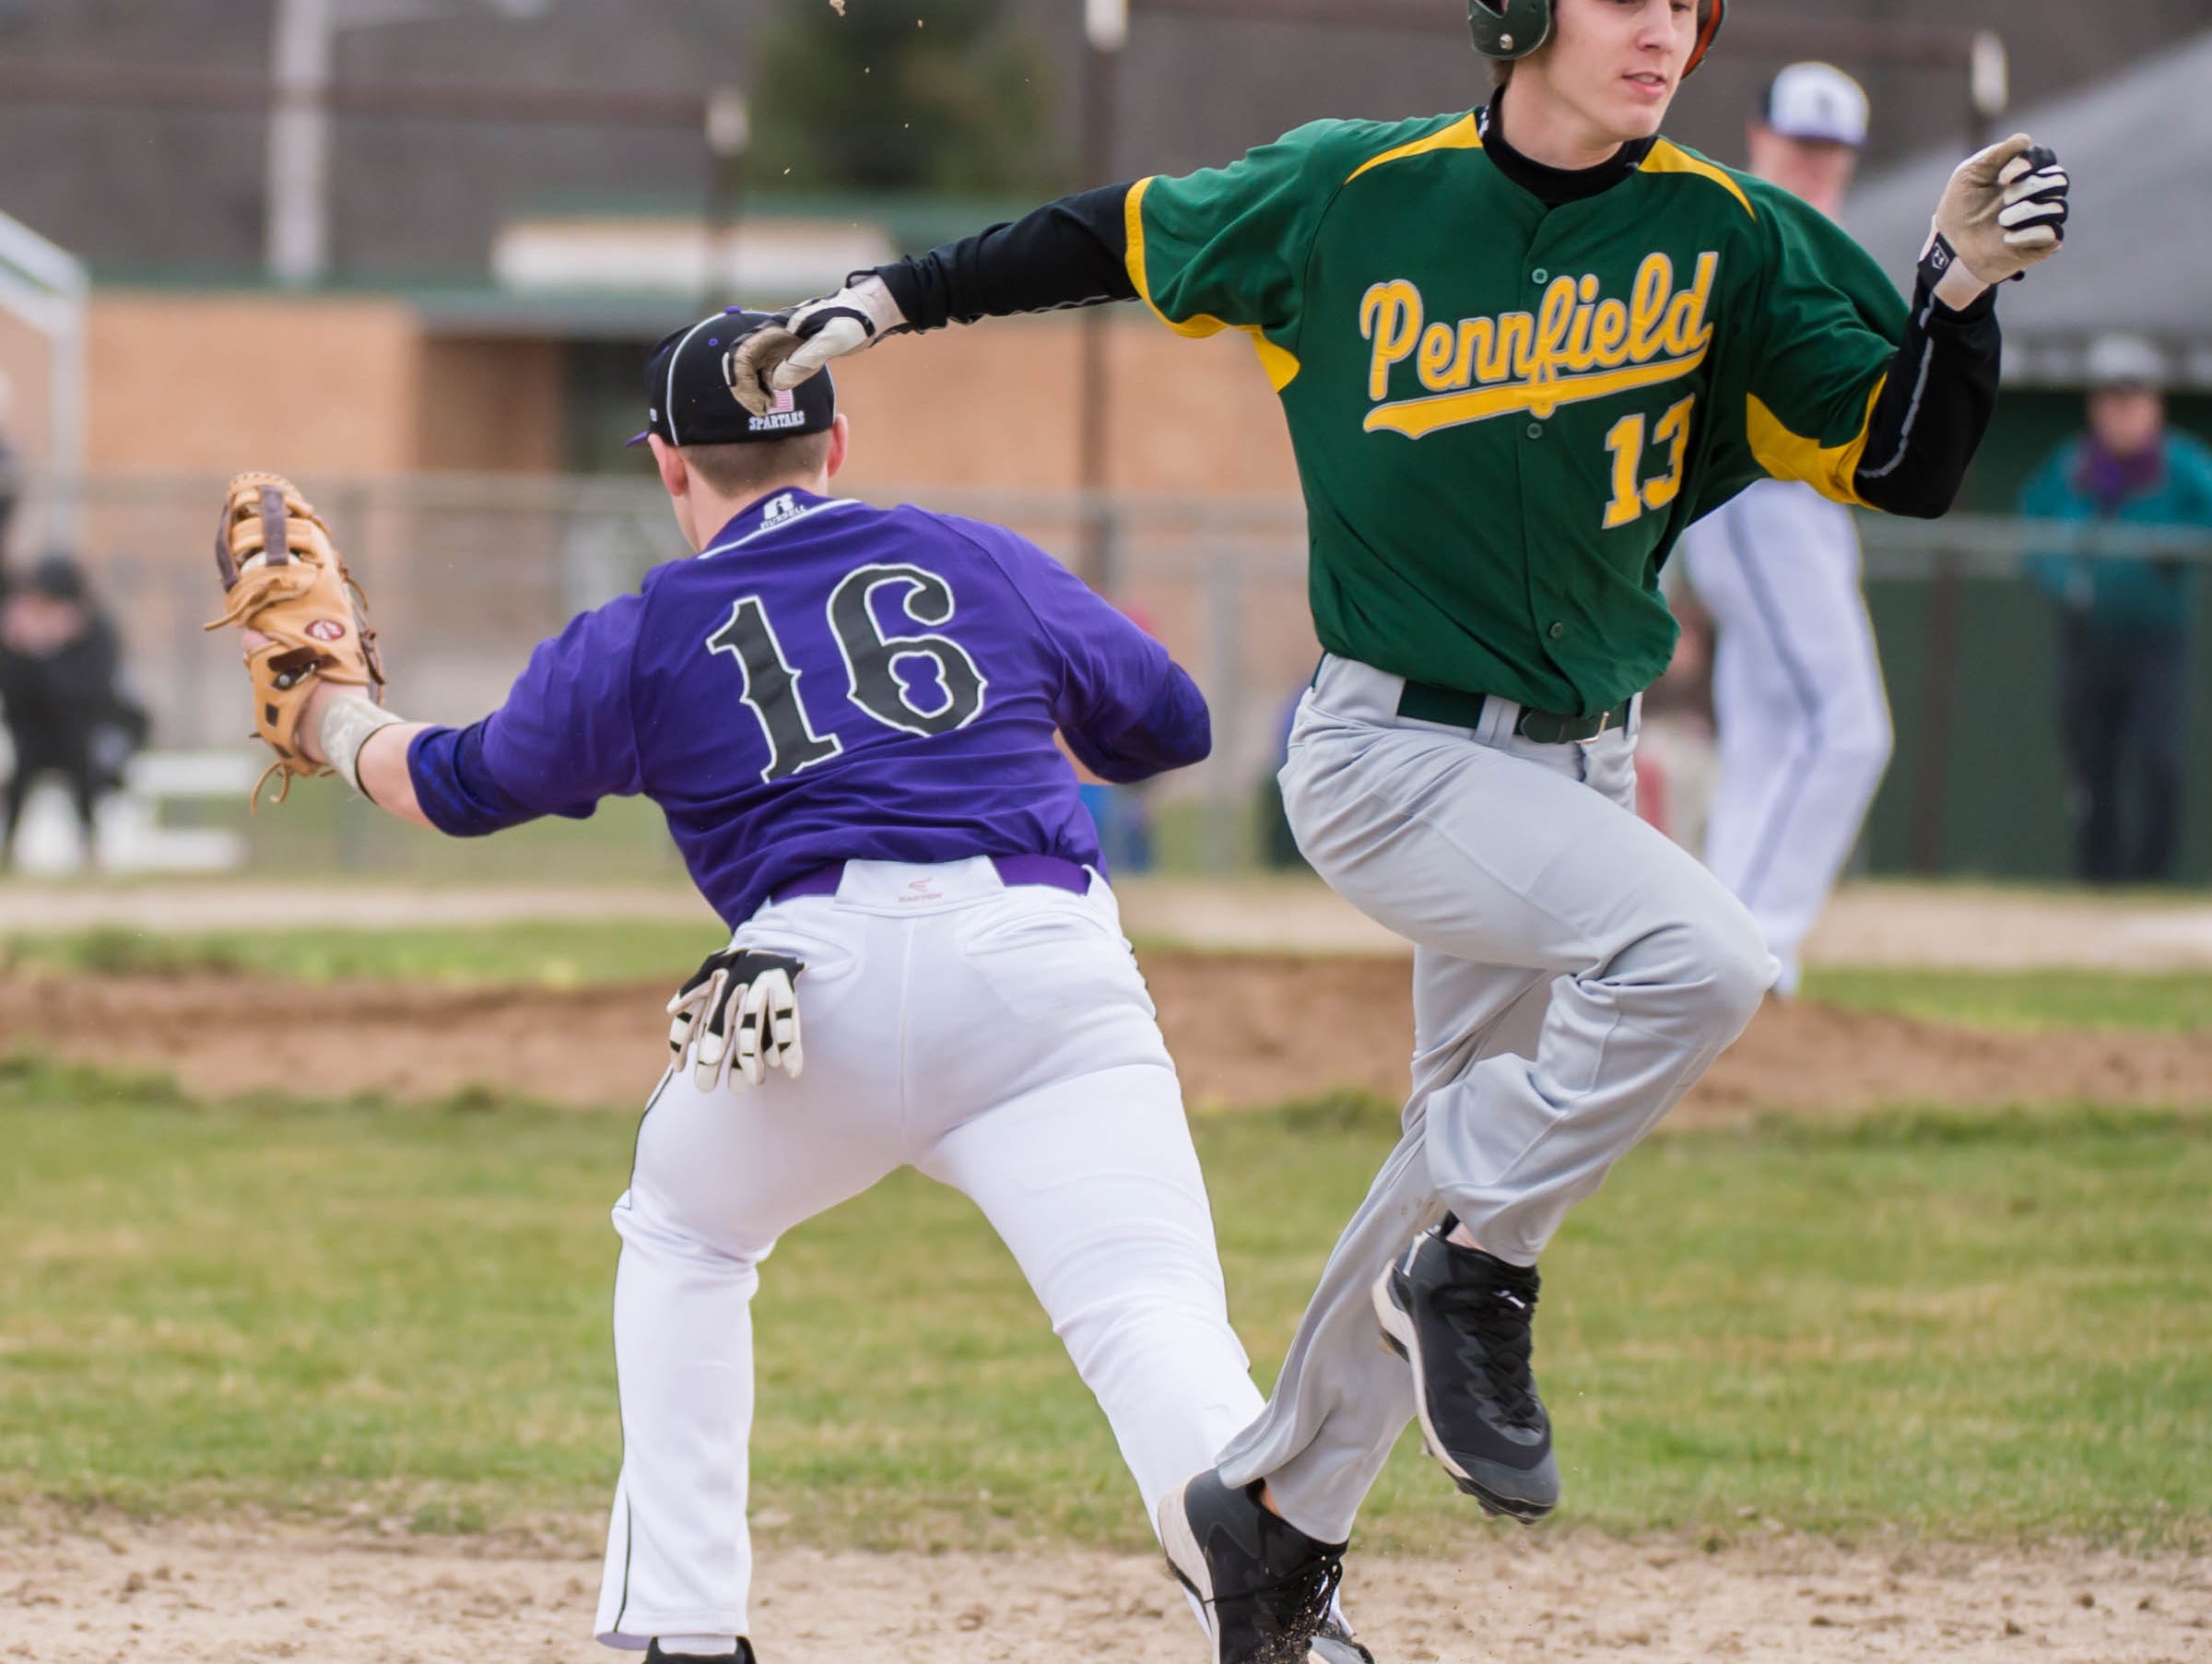 Lakeview's Kevin Sprick (16) gets Pennfield's Jeremy Cook (13) out at first base during a recent game.